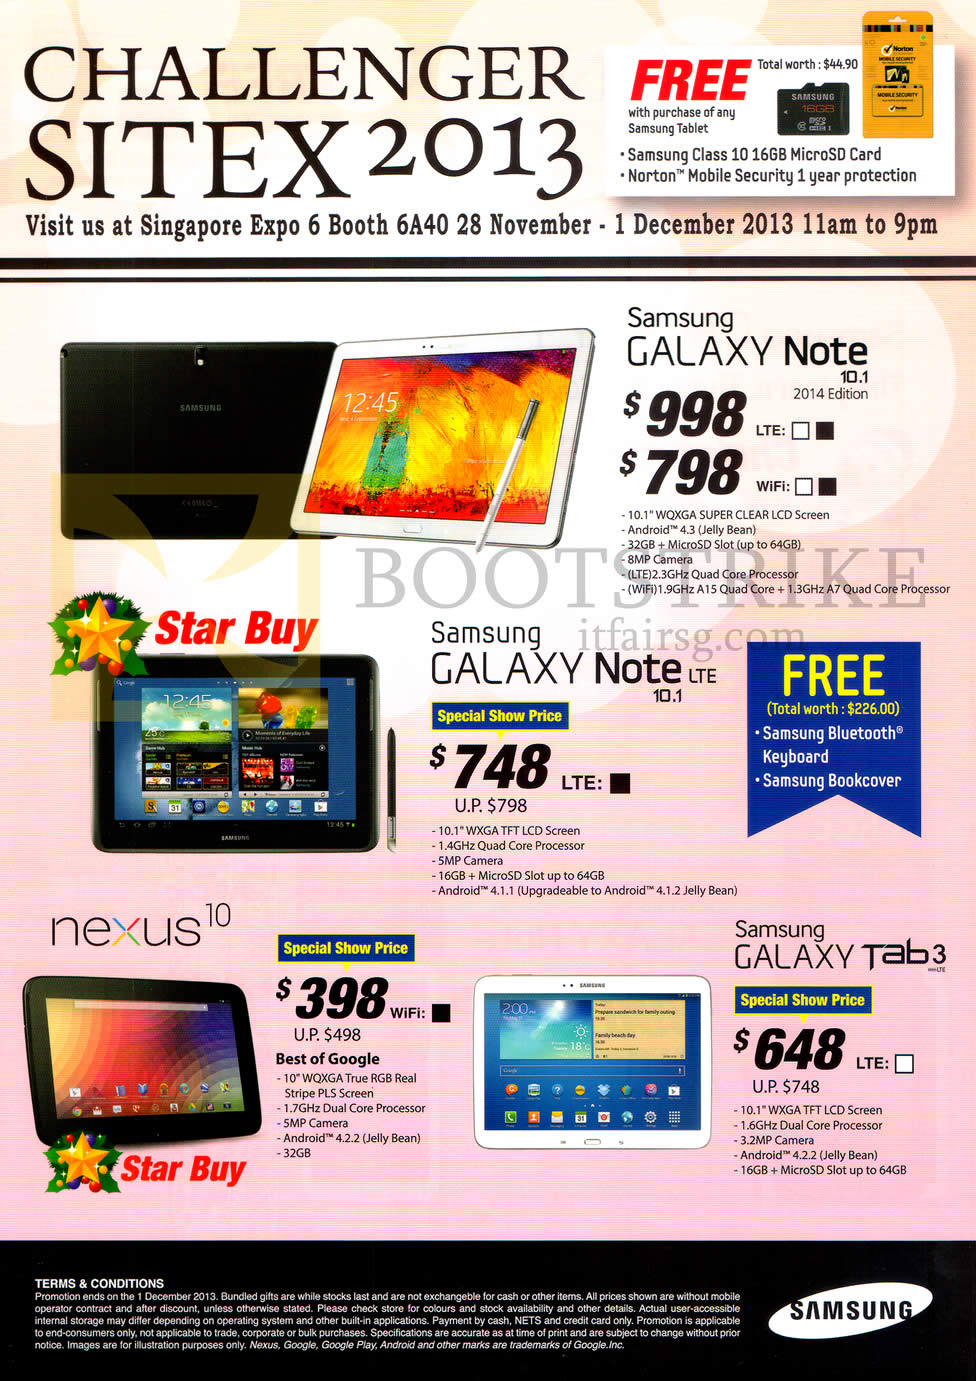 SITEX 2013 price list image brochure of Challenger Samsung Tablets Galaxy Note 10.1 2014 Edition, Note 10.1 LTE, Nexus 10, Tab 3 10.1